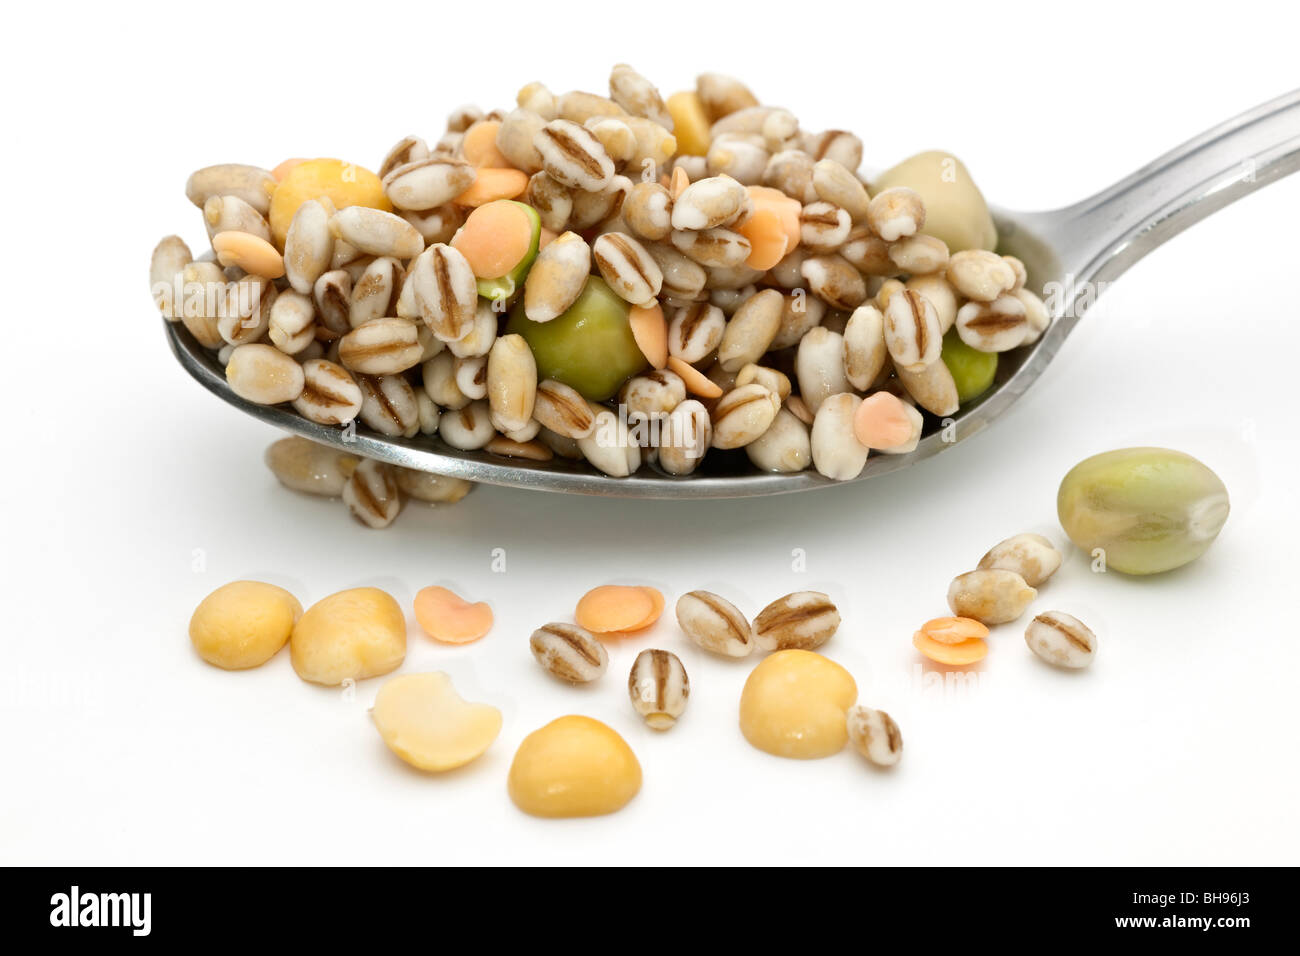 Spoonful of soaked mixed dried peas and lentils Stock Photo